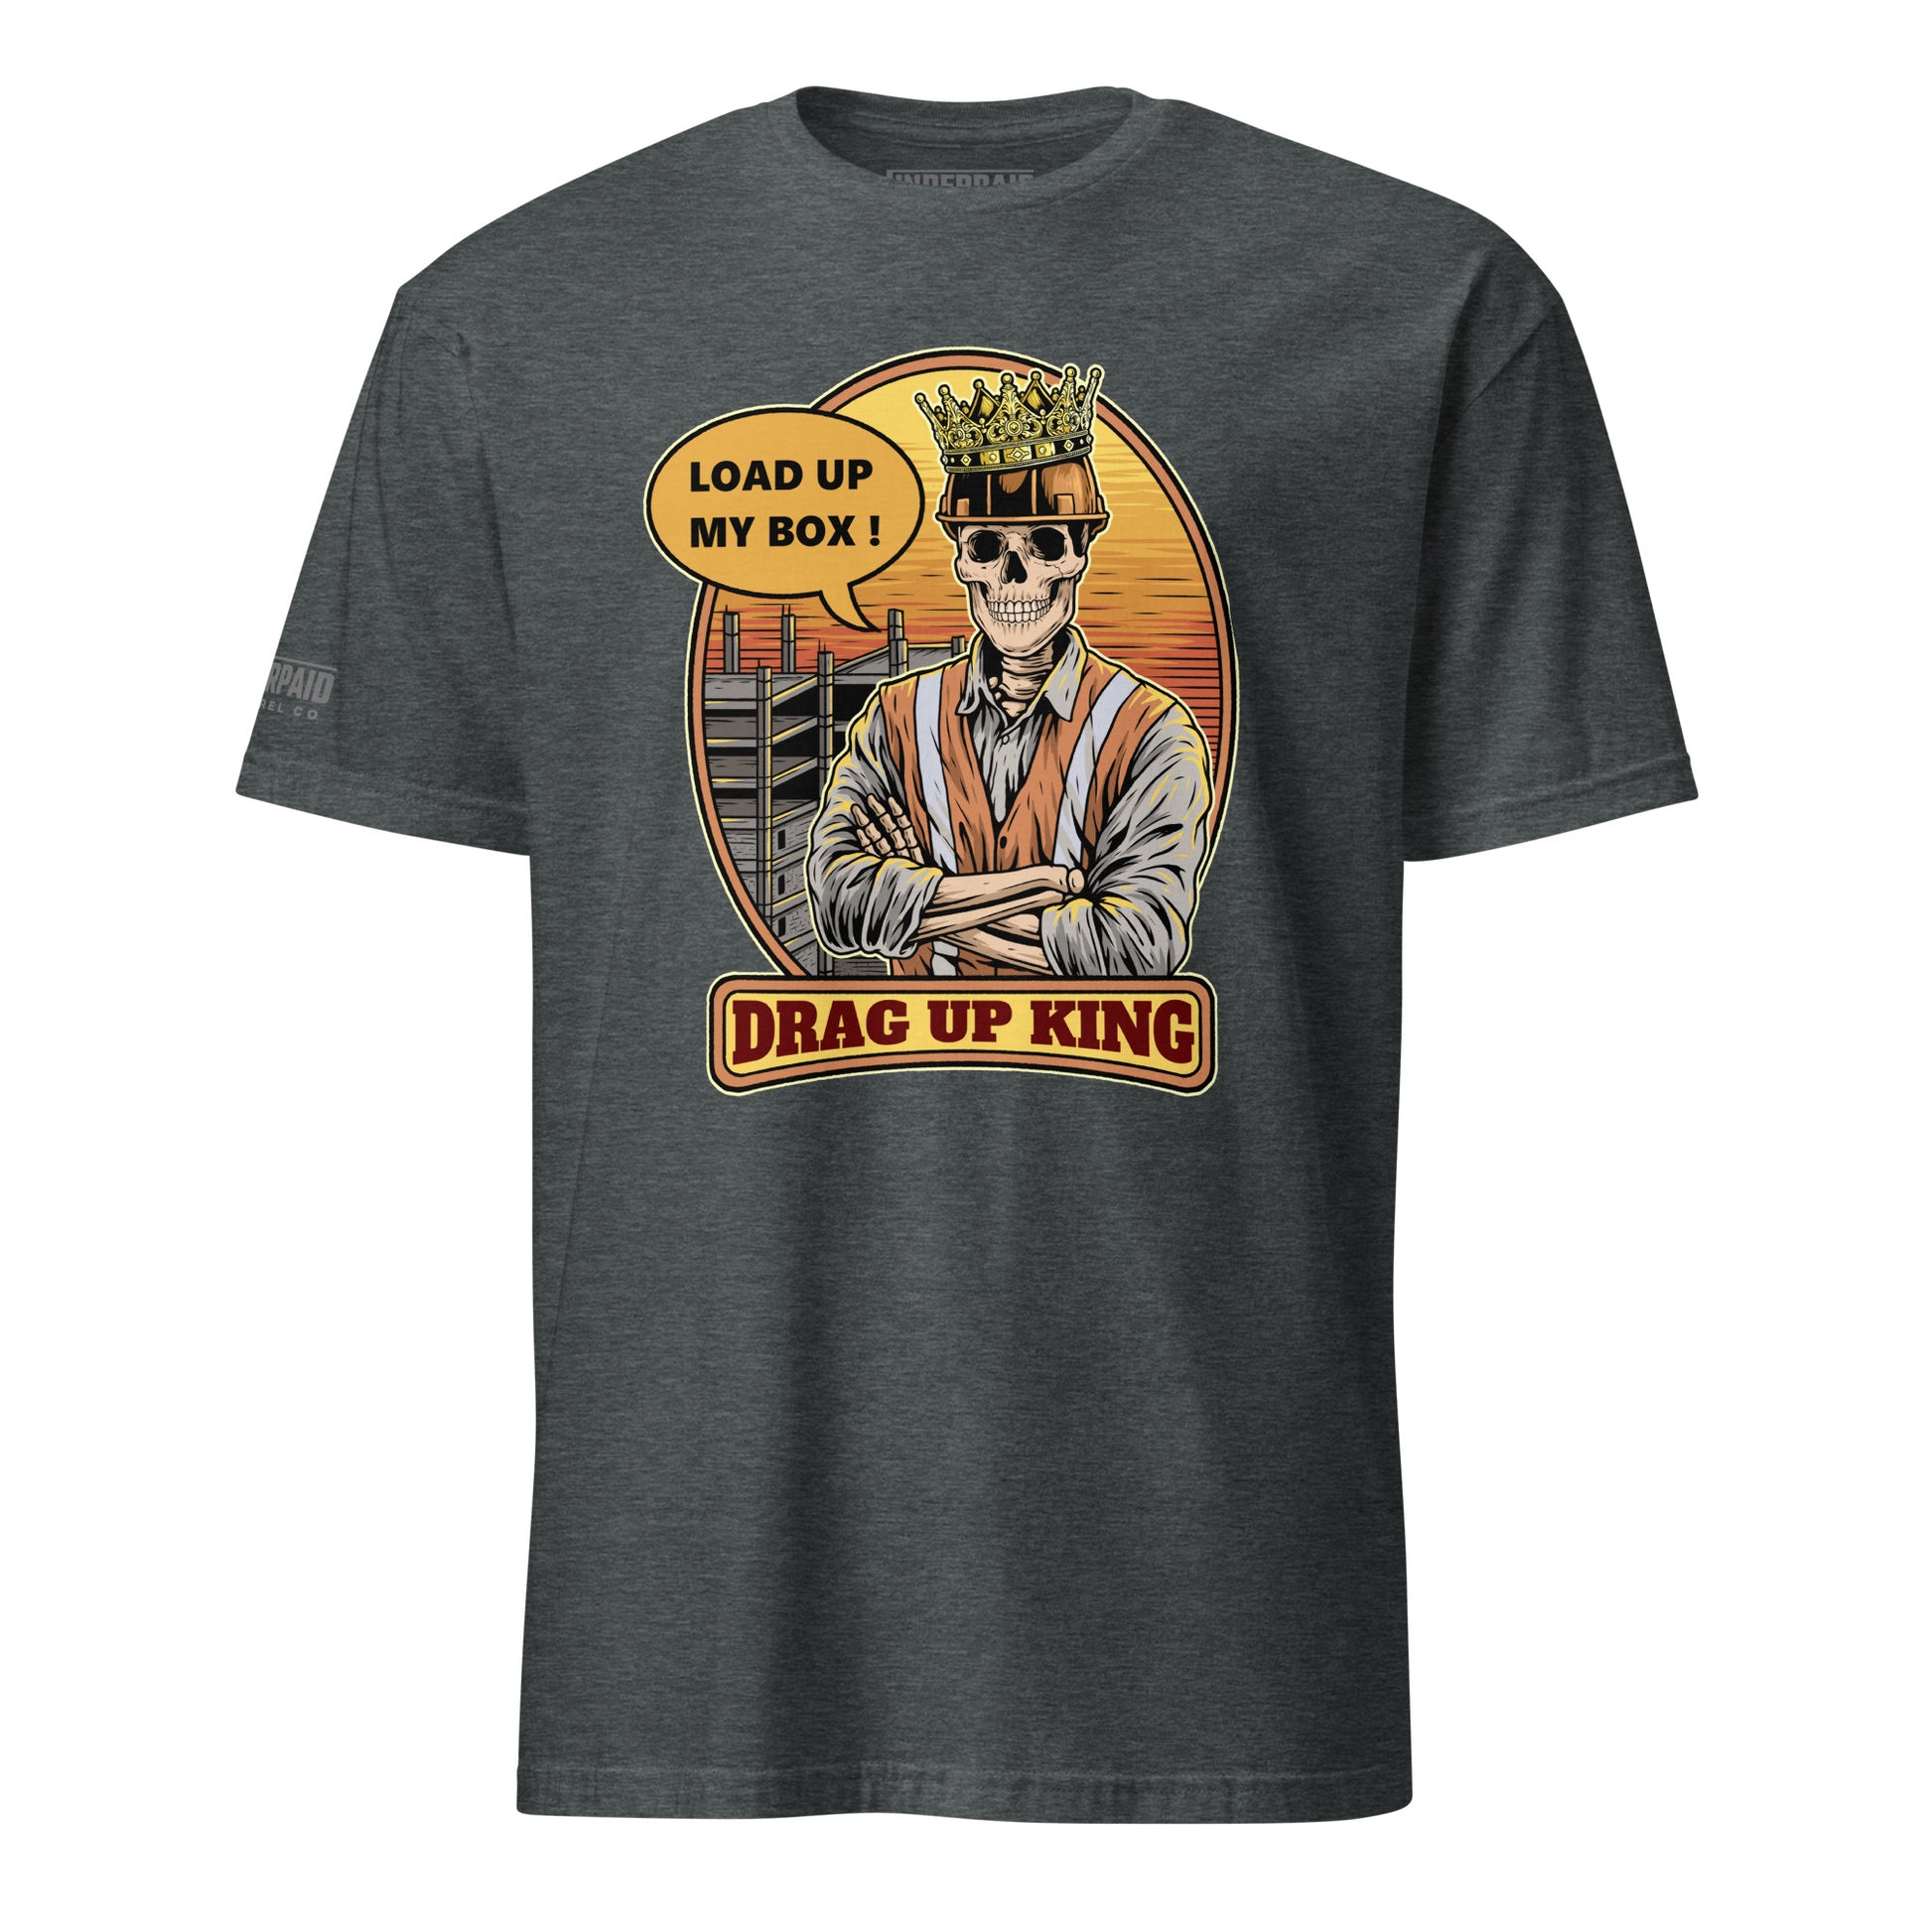 Drag Up King graphic tee featuring full color design